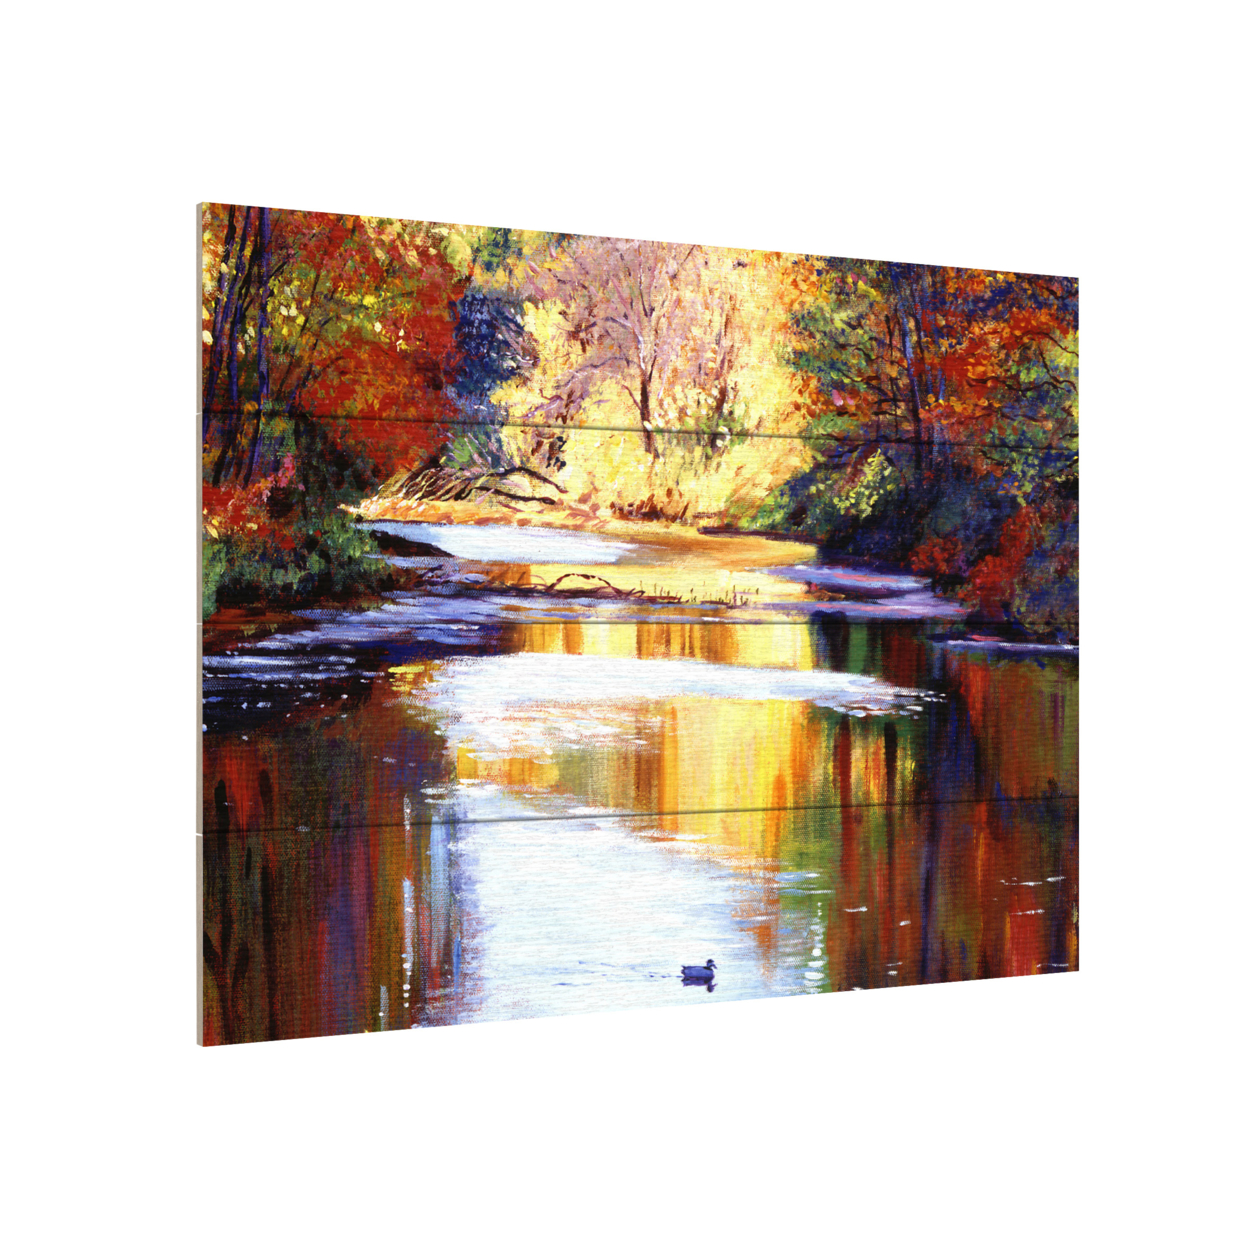 Wall Art 12 X 16 Inches Titled Reflections Of August Ready To Hang Printed On Wooden Planks